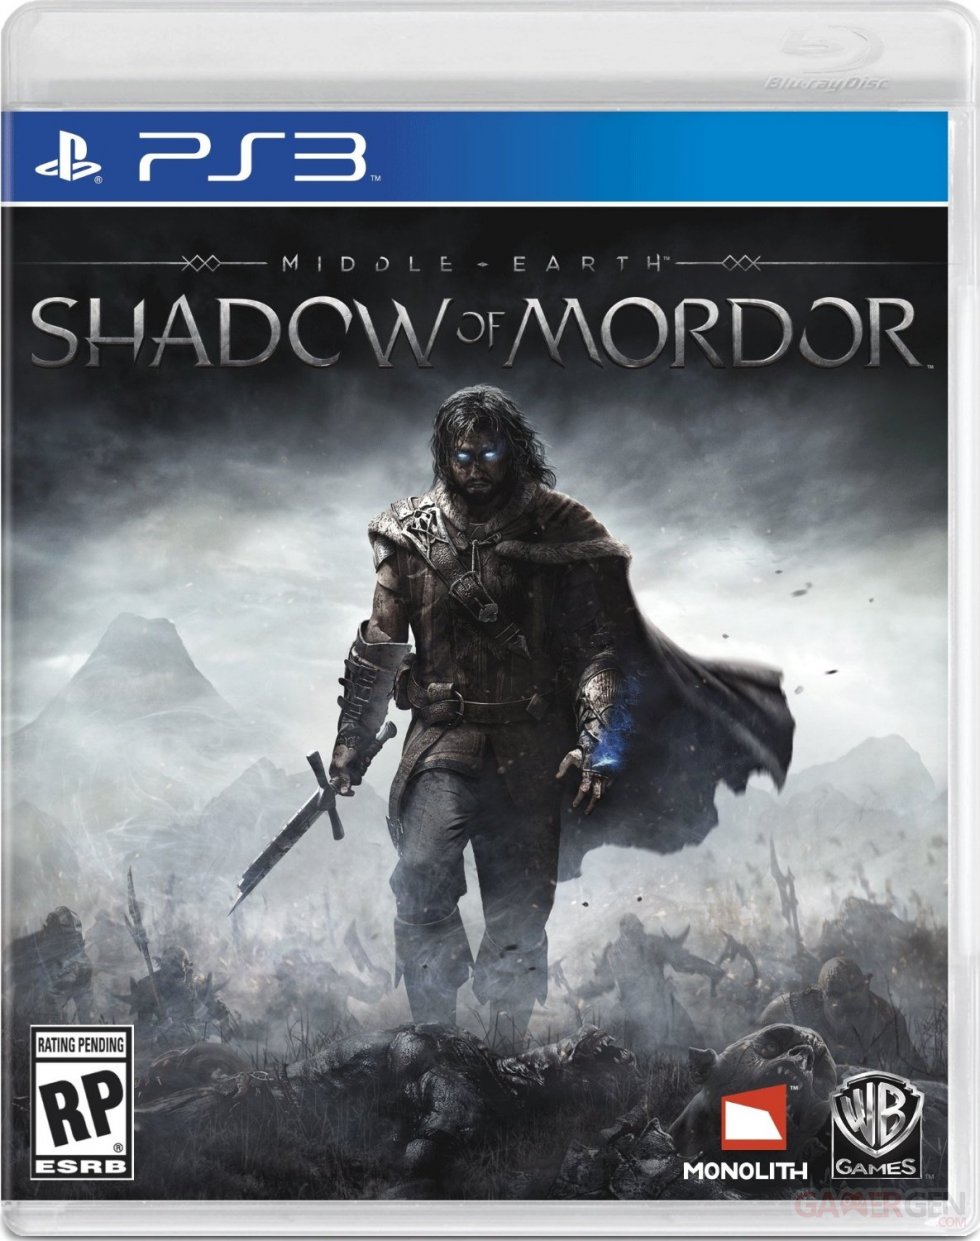 middle-earth-shadow-of-mordor-cover-jaquette-boxart-ps3